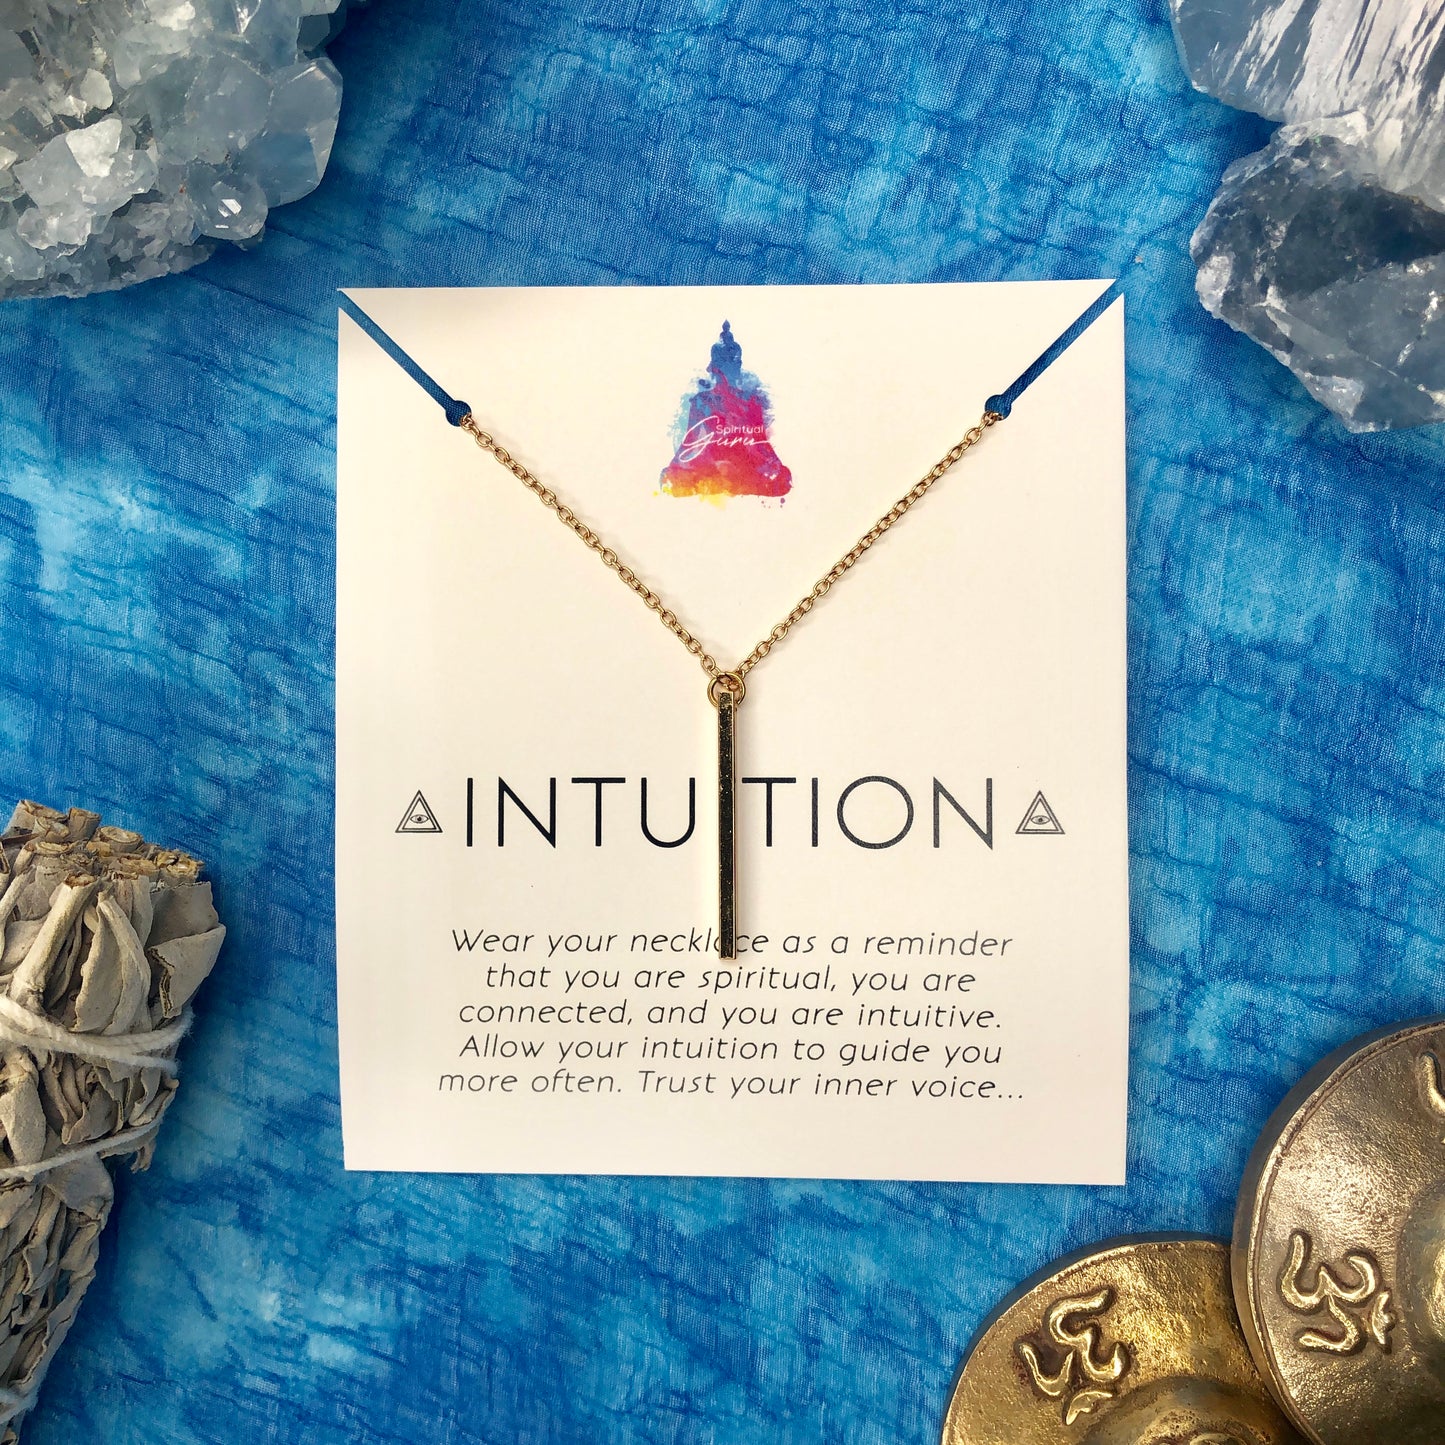 "Intuition" Affirmation Necklace